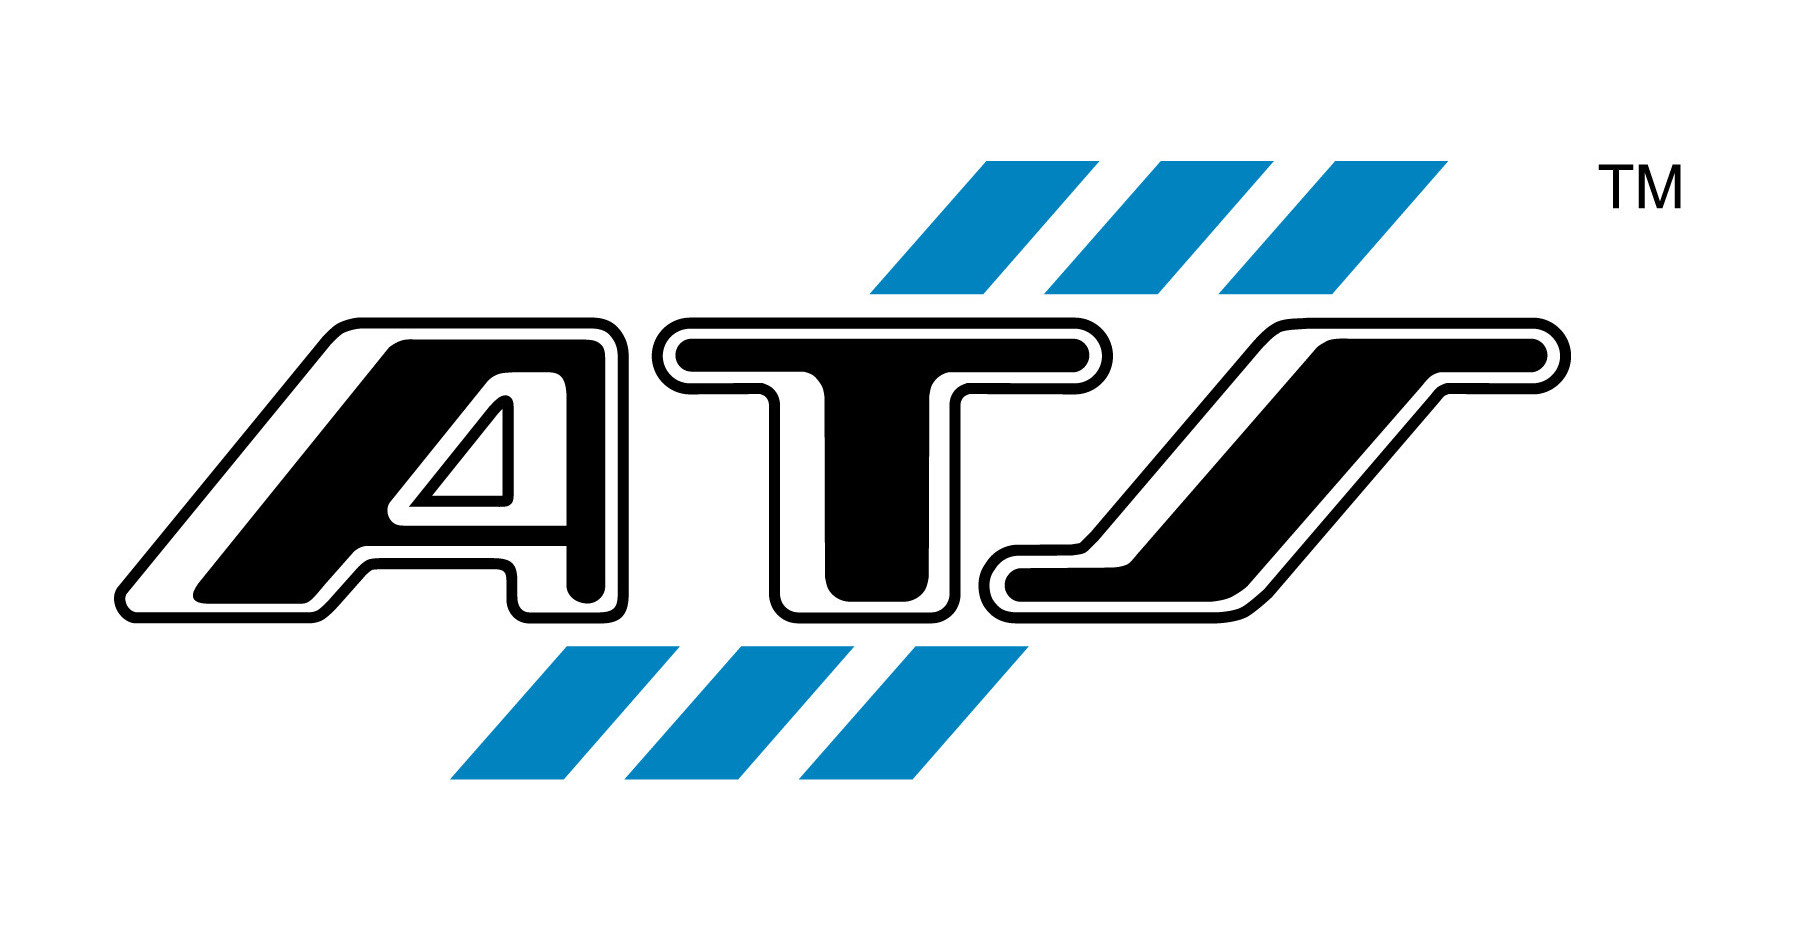 ATS to Participate in the Scotiabank Transportation & Industrials Conference